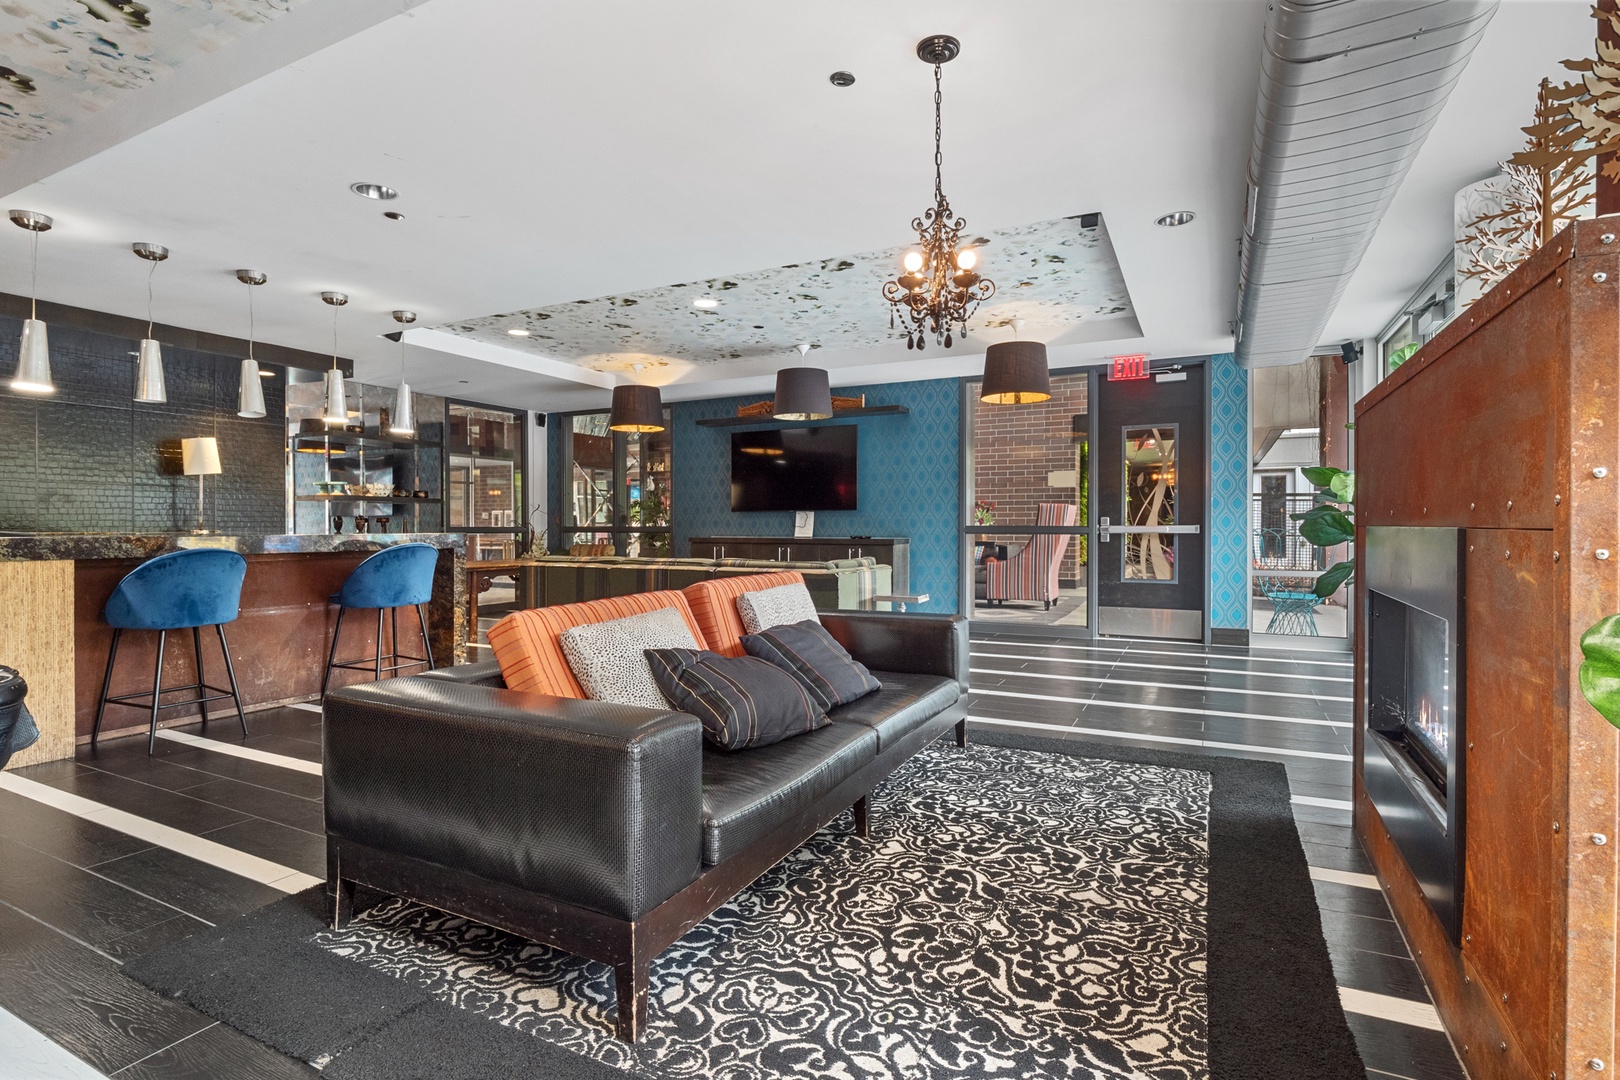 Your Urban Oasis Awaits: The City Club Mill District - Where Comfort and Convenience Converge